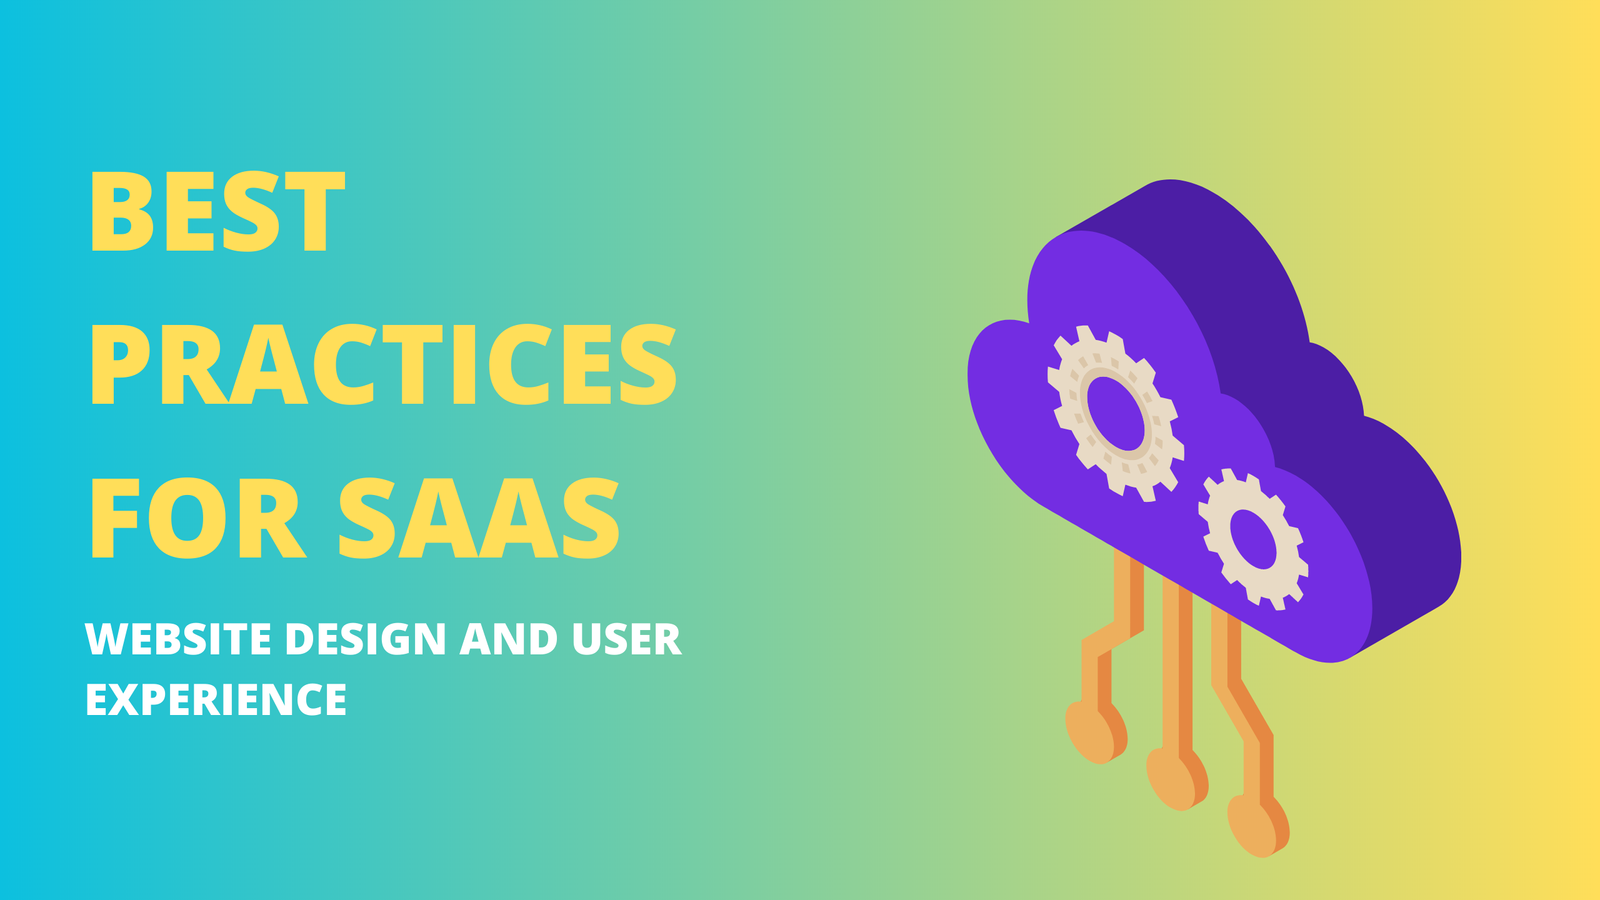 Best Practices for SaaS Website Design and User Experience